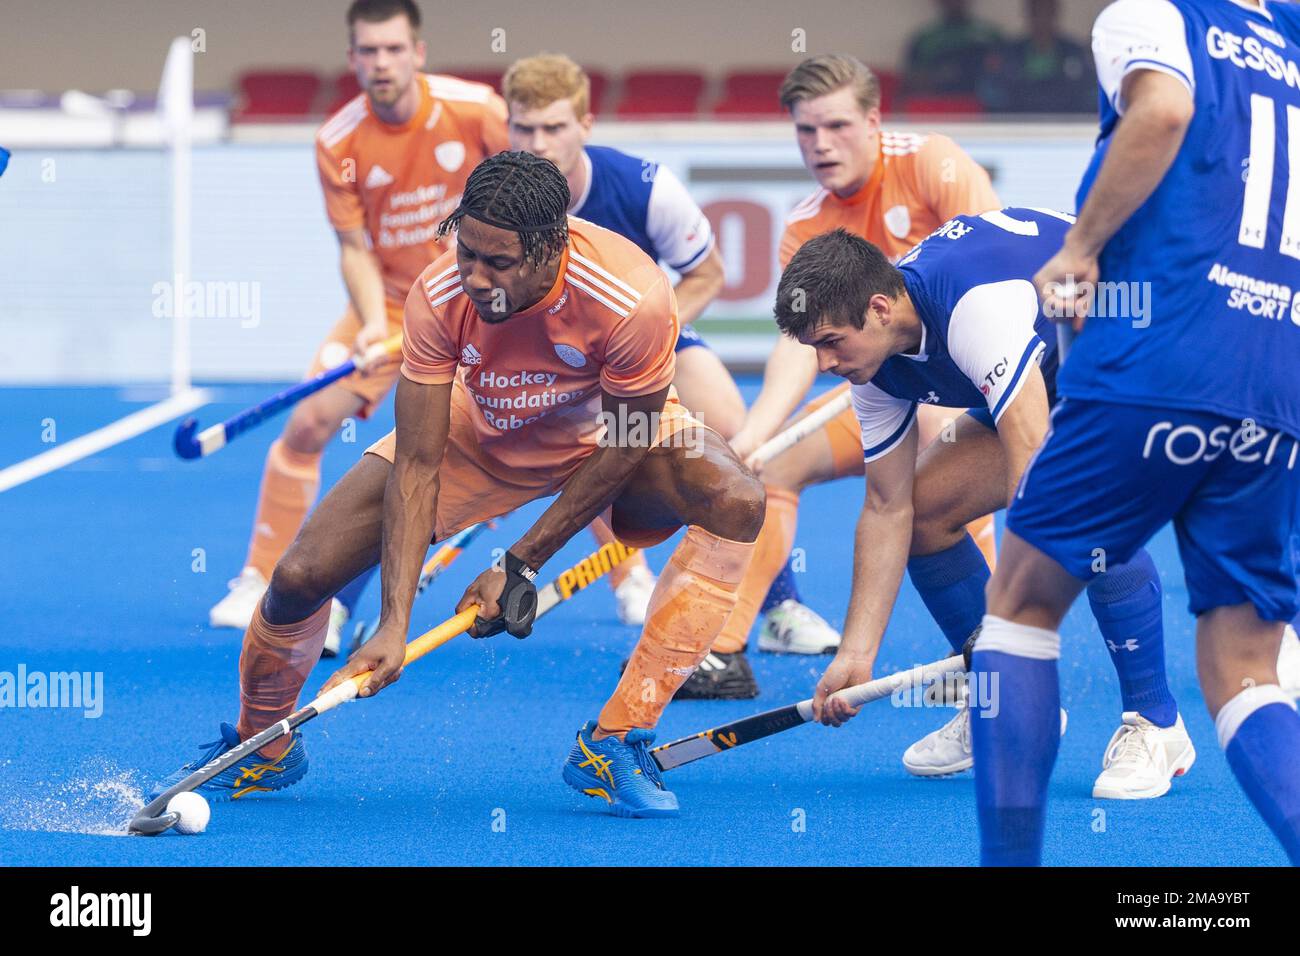 BHUBANESWAR - Goalkeeper Maurits Visser (GK) (NED) during the match Netherlands against Chile at the Hockey World Cup In India. AP WILLEM VERNES Stock Photo